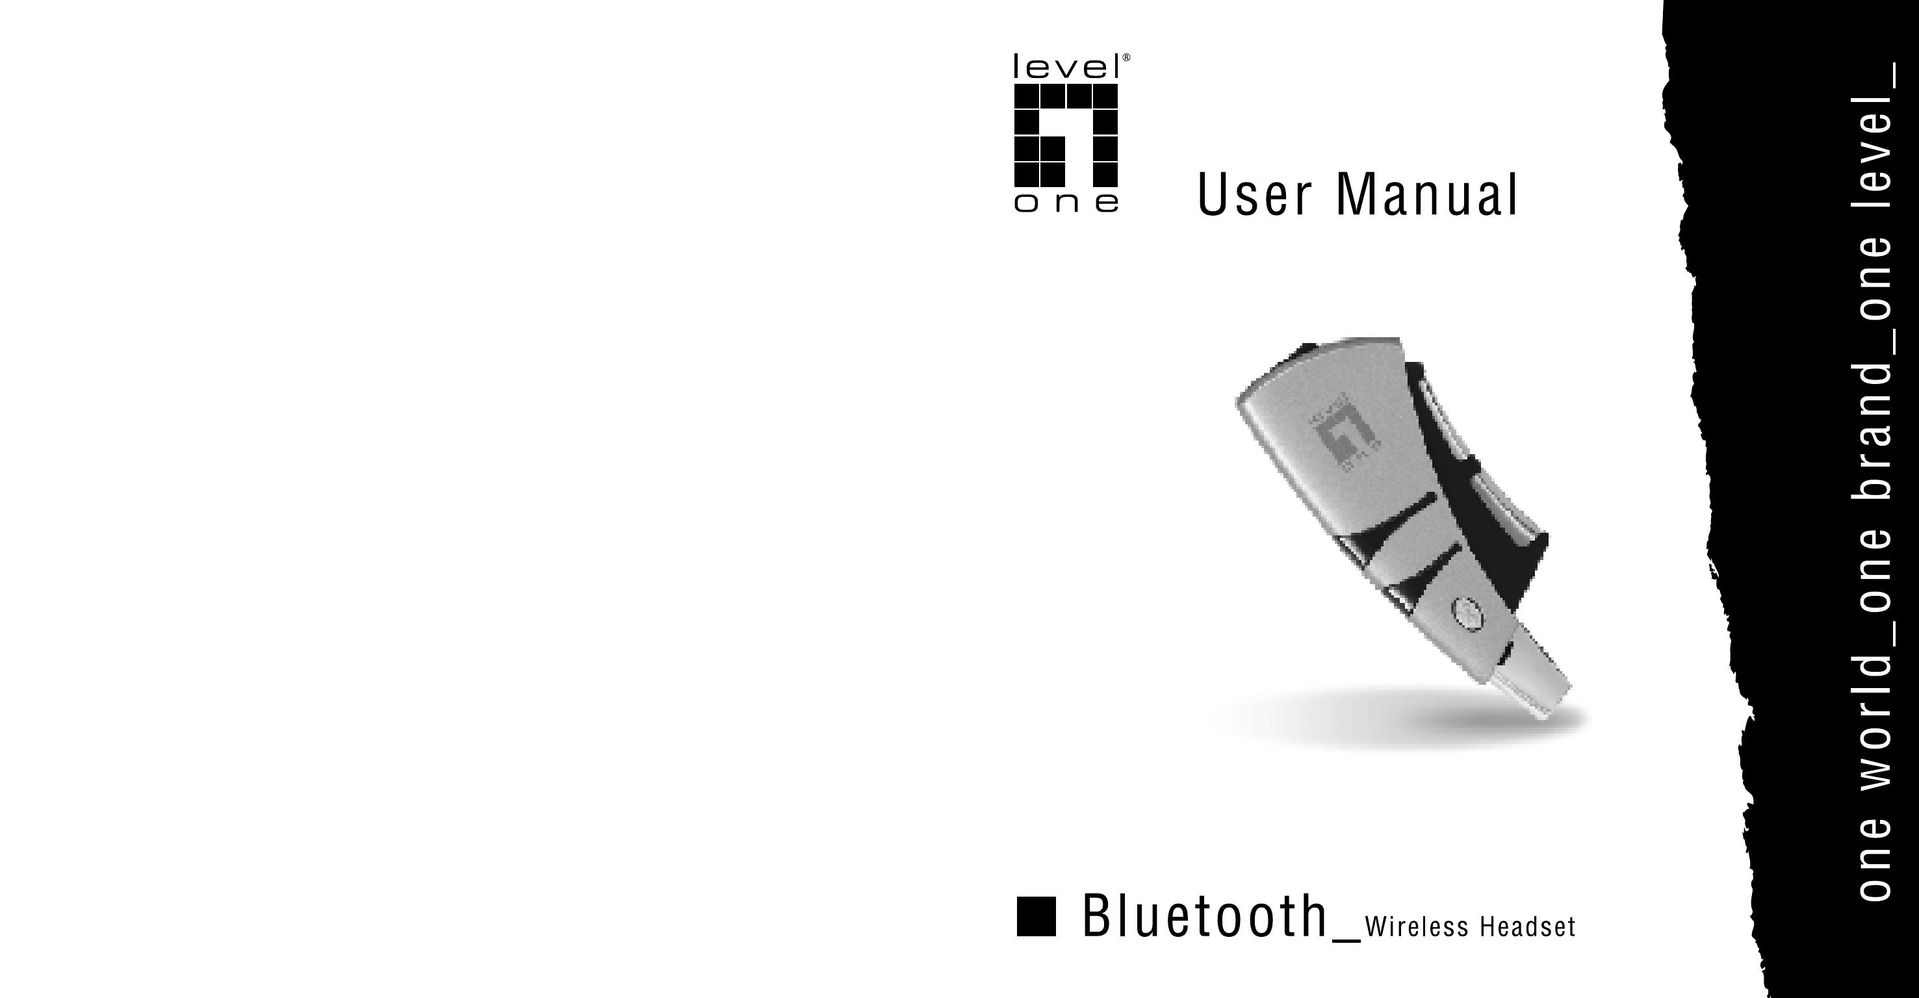 LevelOne BLH-1100 Bluetooth Headset User Manual